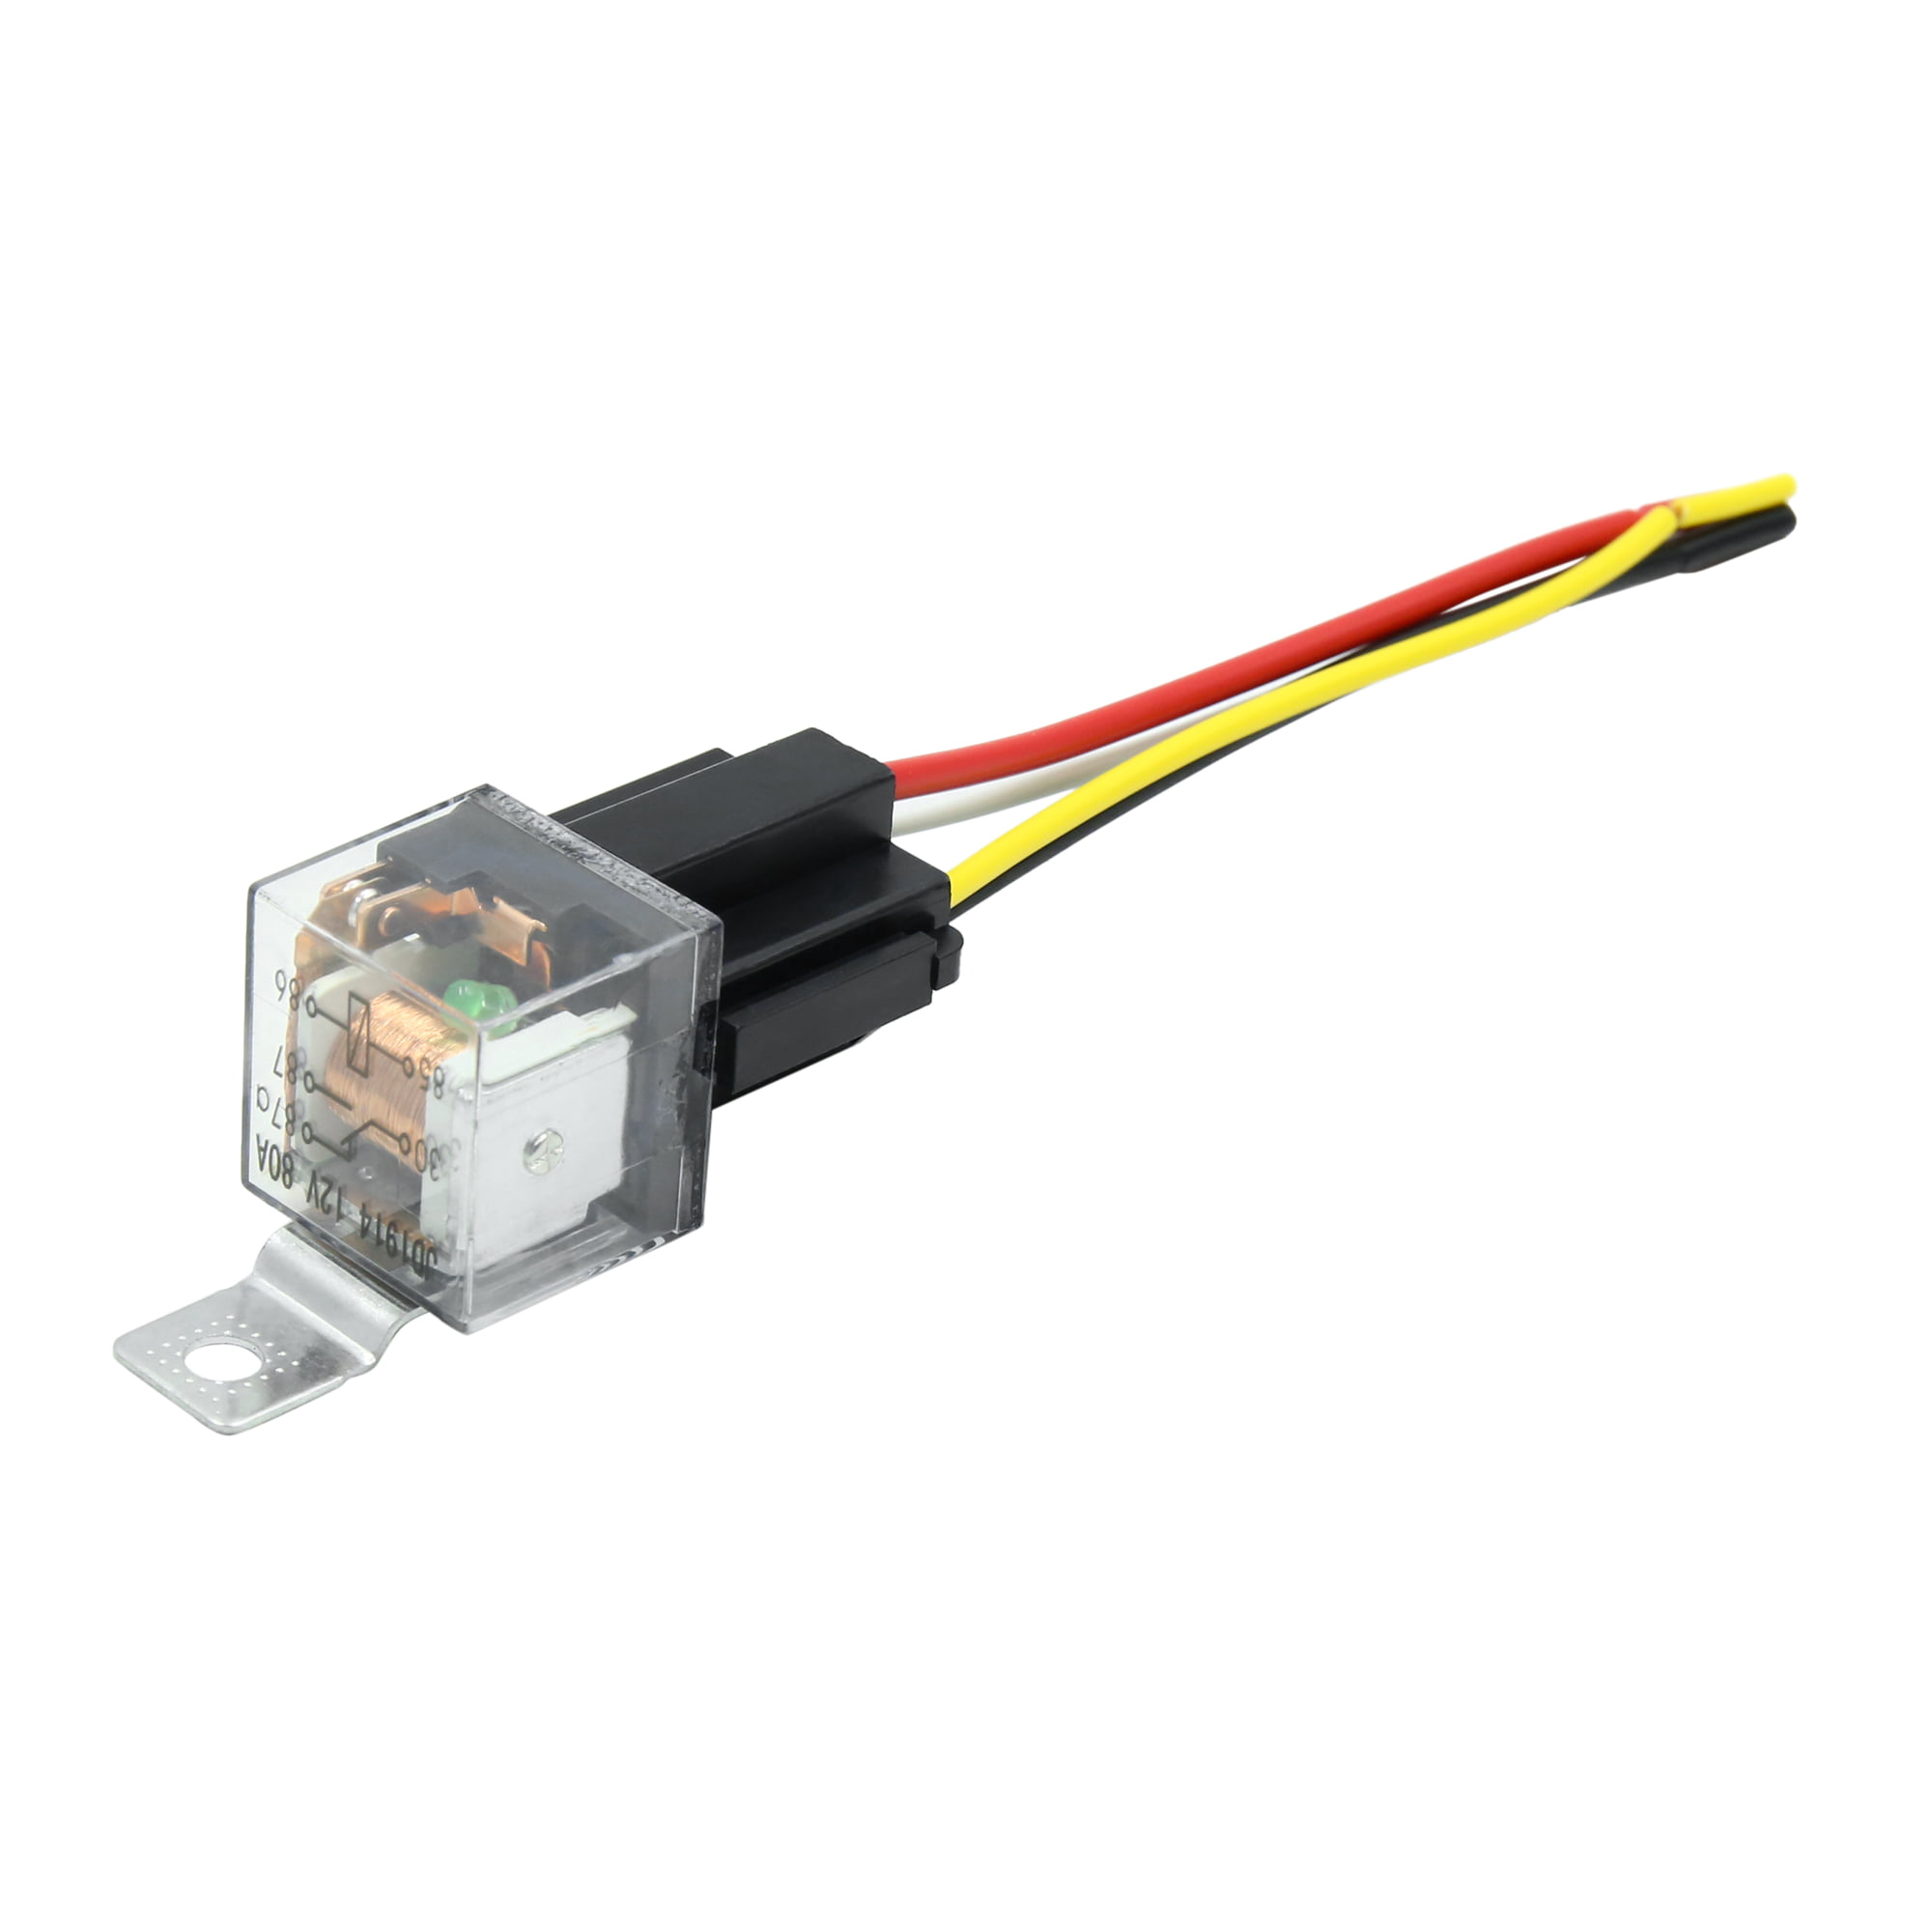 uxcell DC 12V 80A SPDT Automotive Car Relay 5 Pin 5 Wires w/Harness Socket Plug